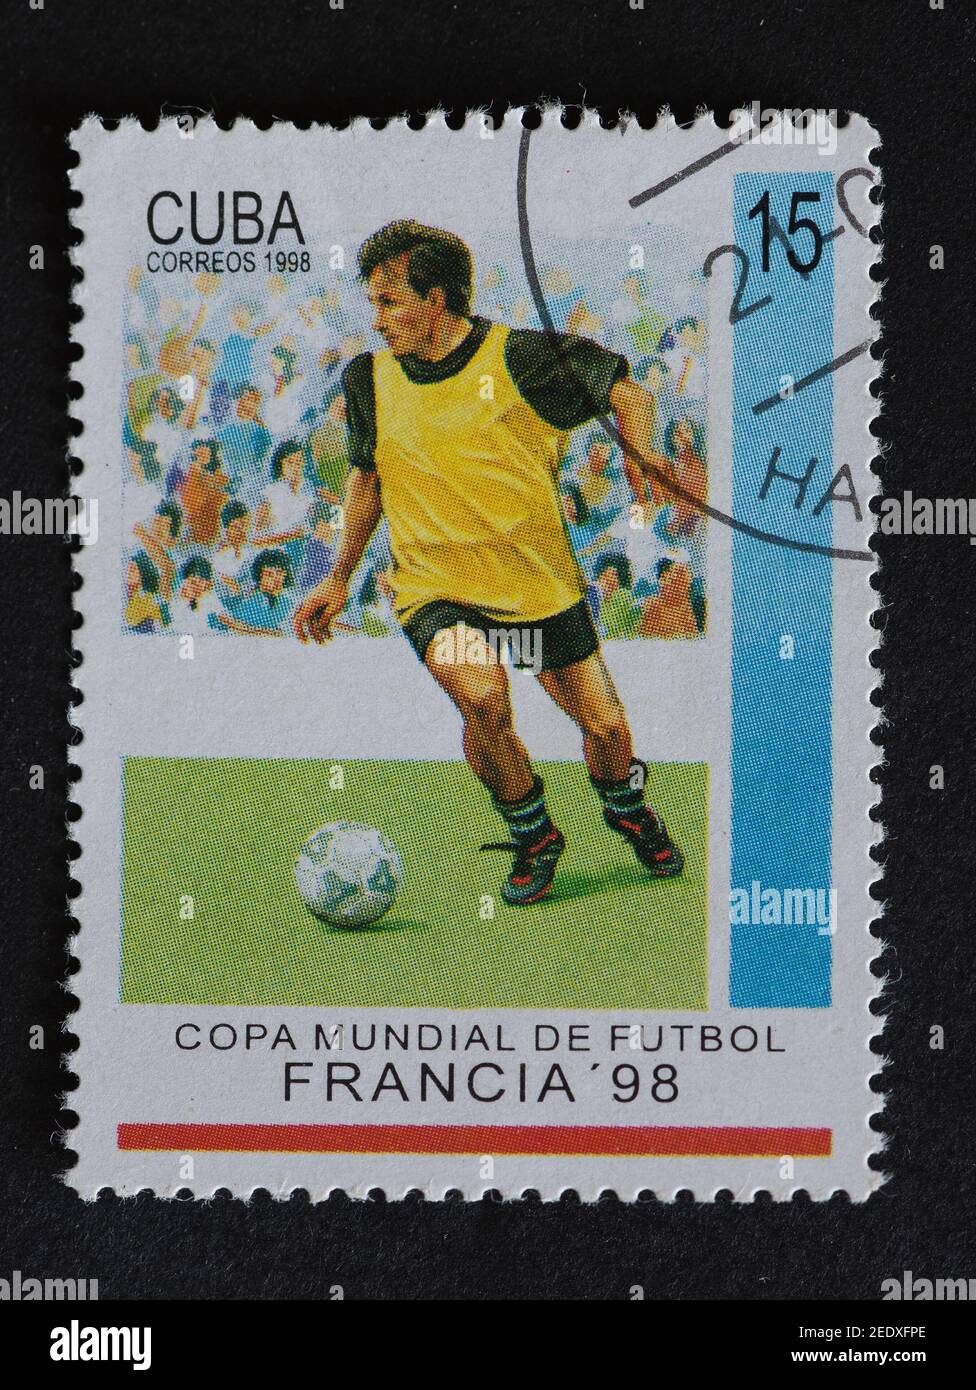 France World Cup of Soccer or Football 1998. Old Vintage Cuban Postal Stamp Stock Photo